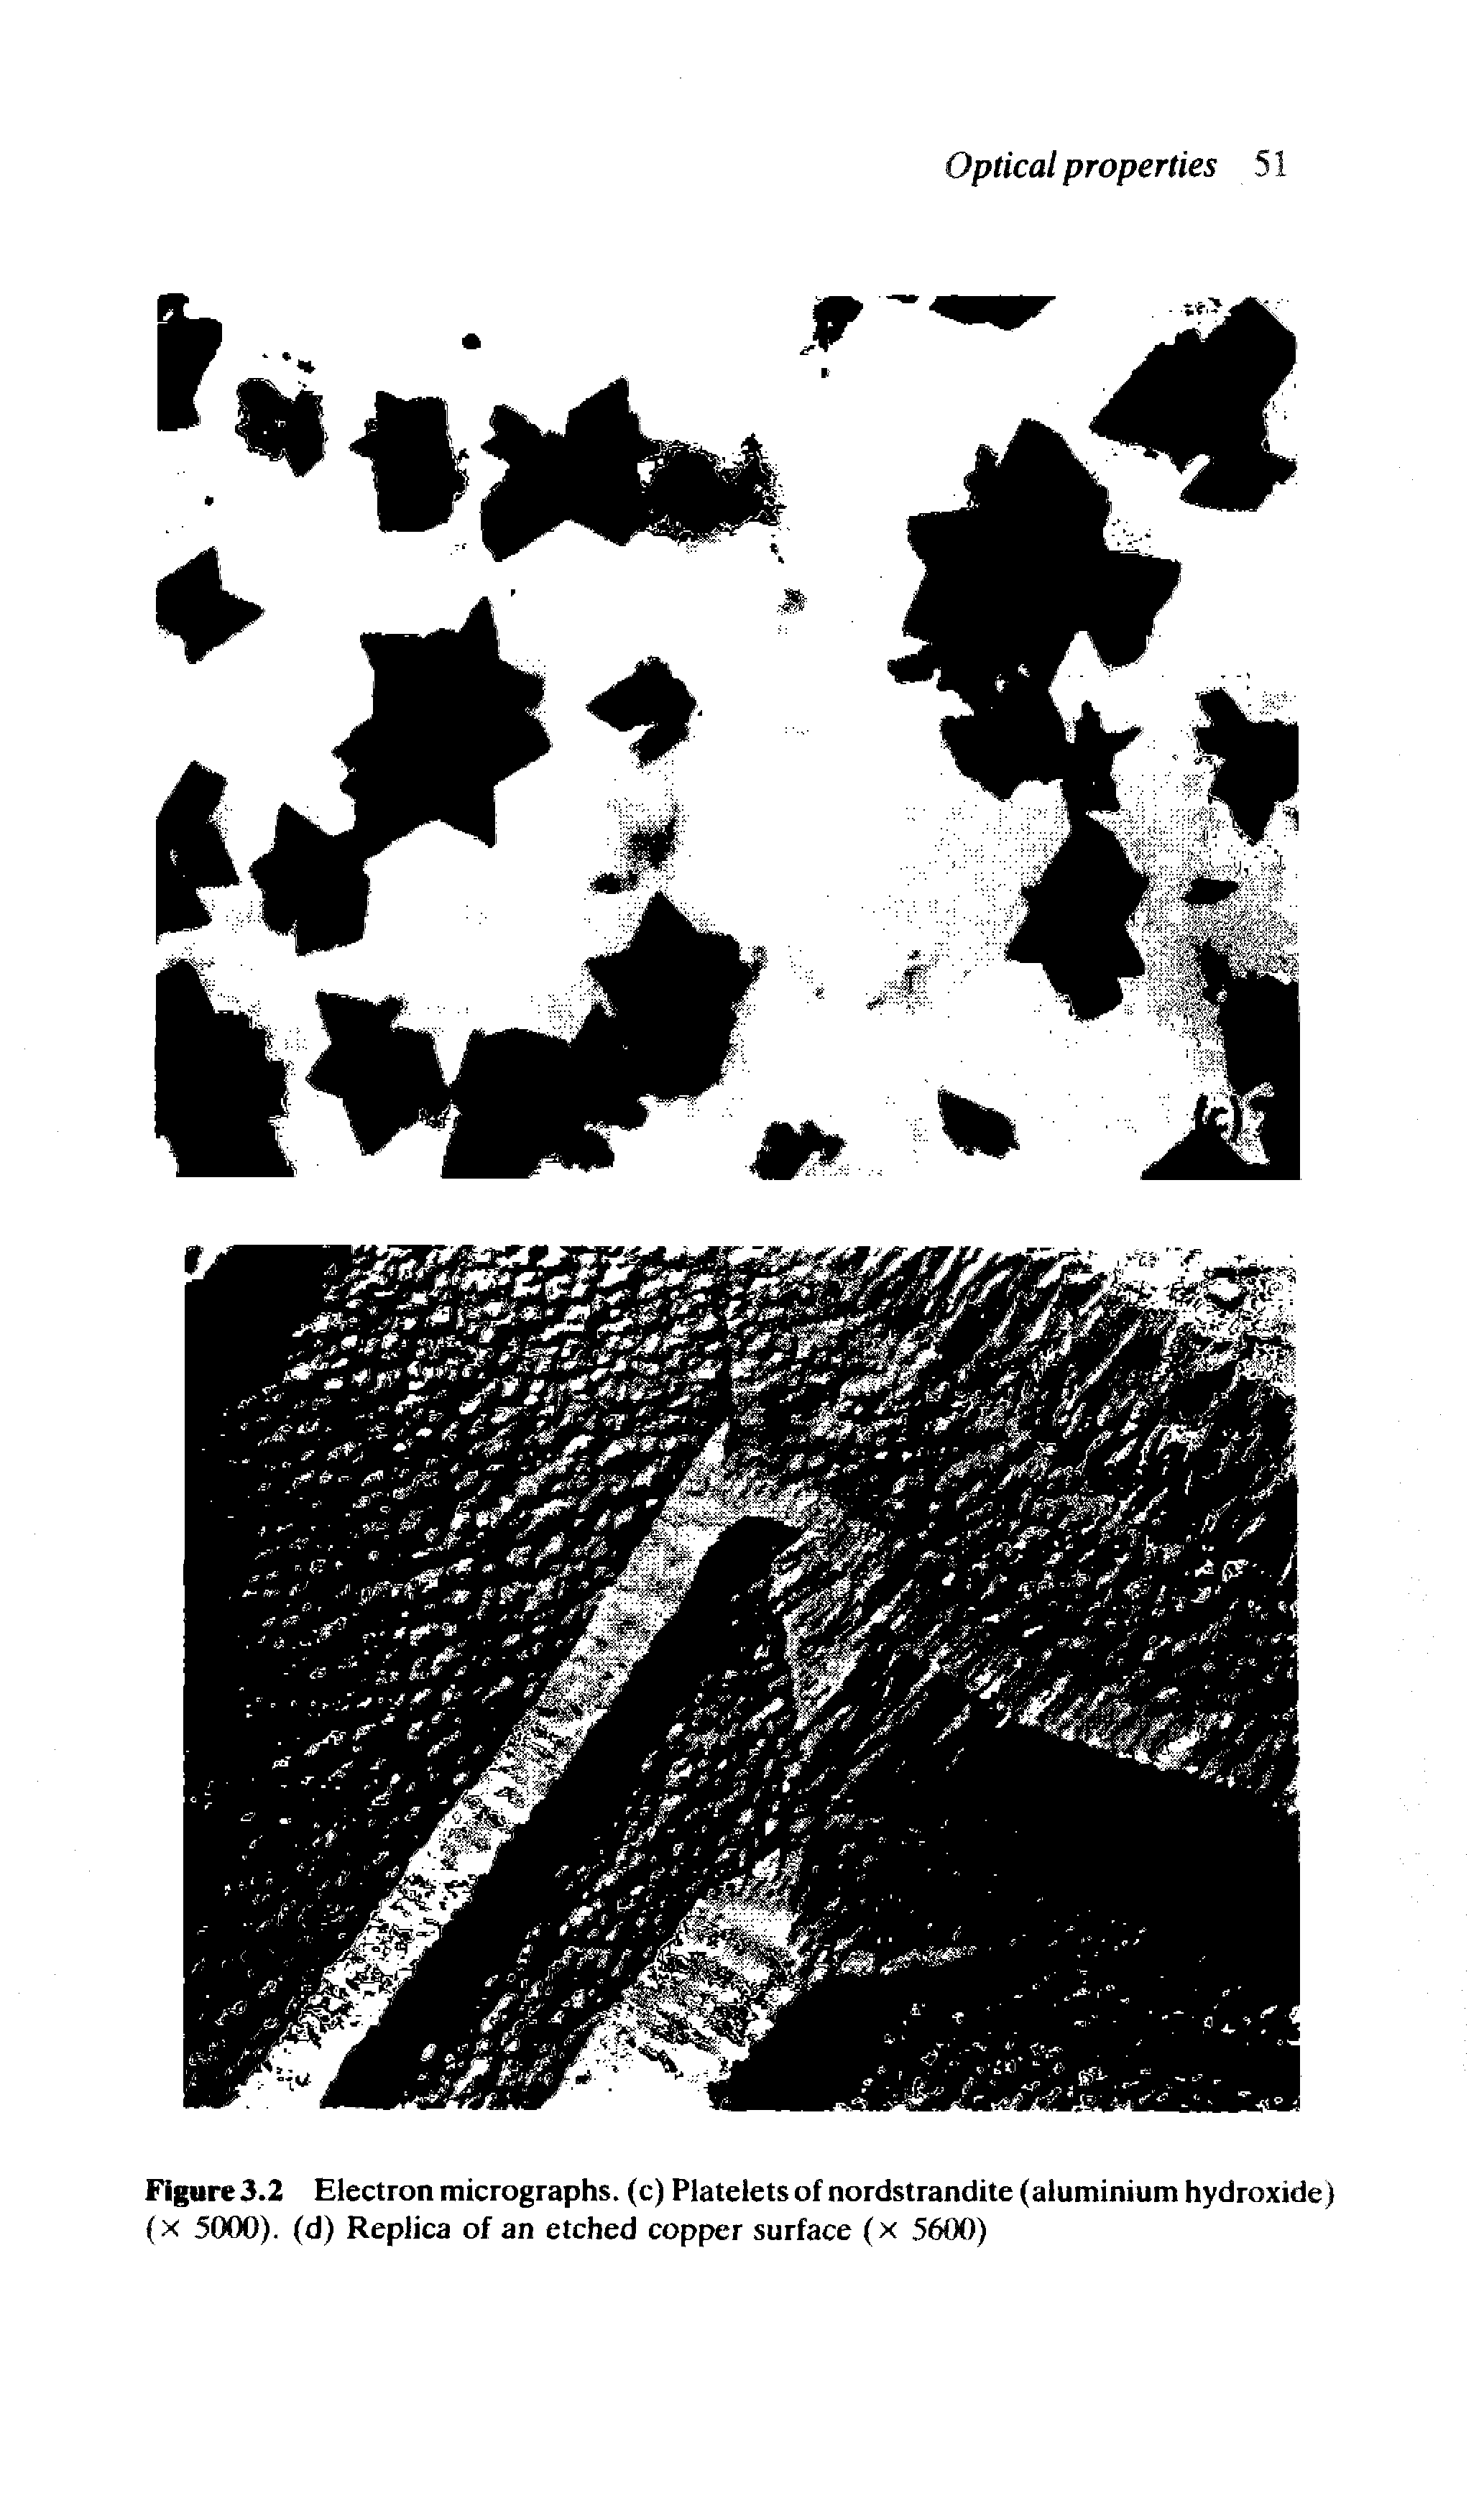 Figure 3.2 Electron micrographs, (c) Platelets of nordstrandite (aluminium hydroxide) (x 5000). (d) Replica of an etched copper surface (x 5600)...